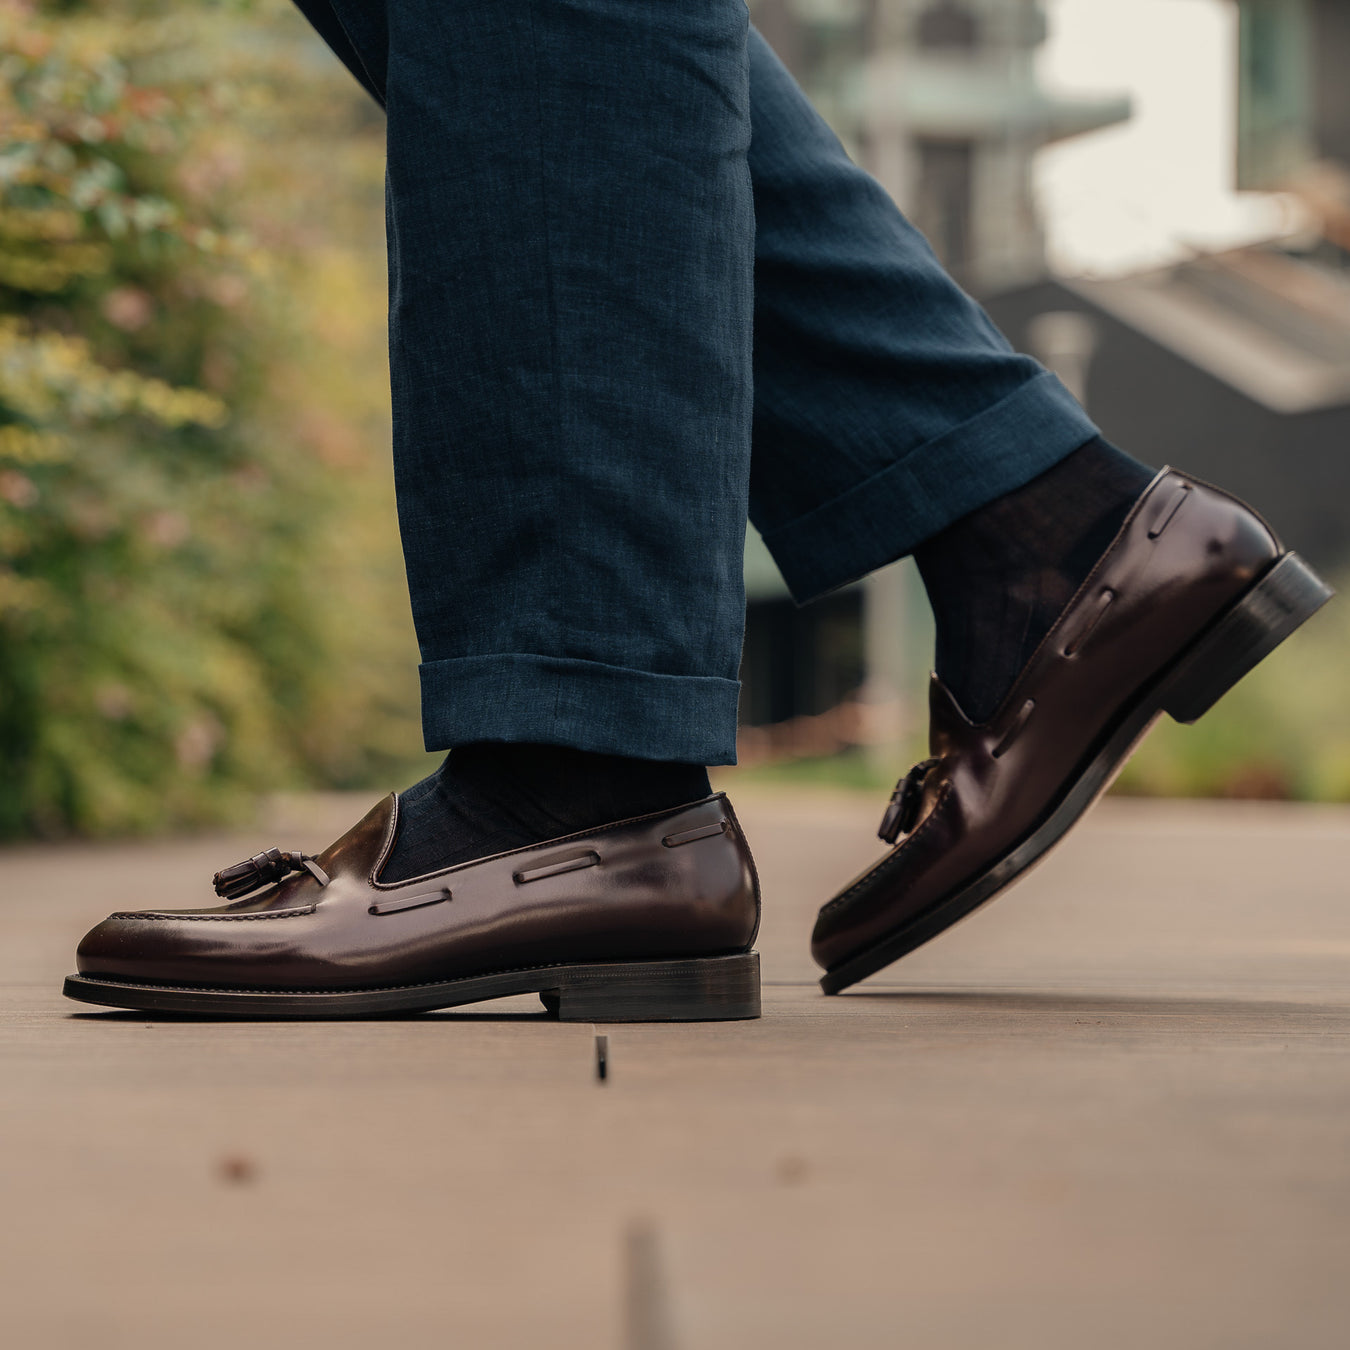 Men’s brown leather Loafers with Tassels | Velasca